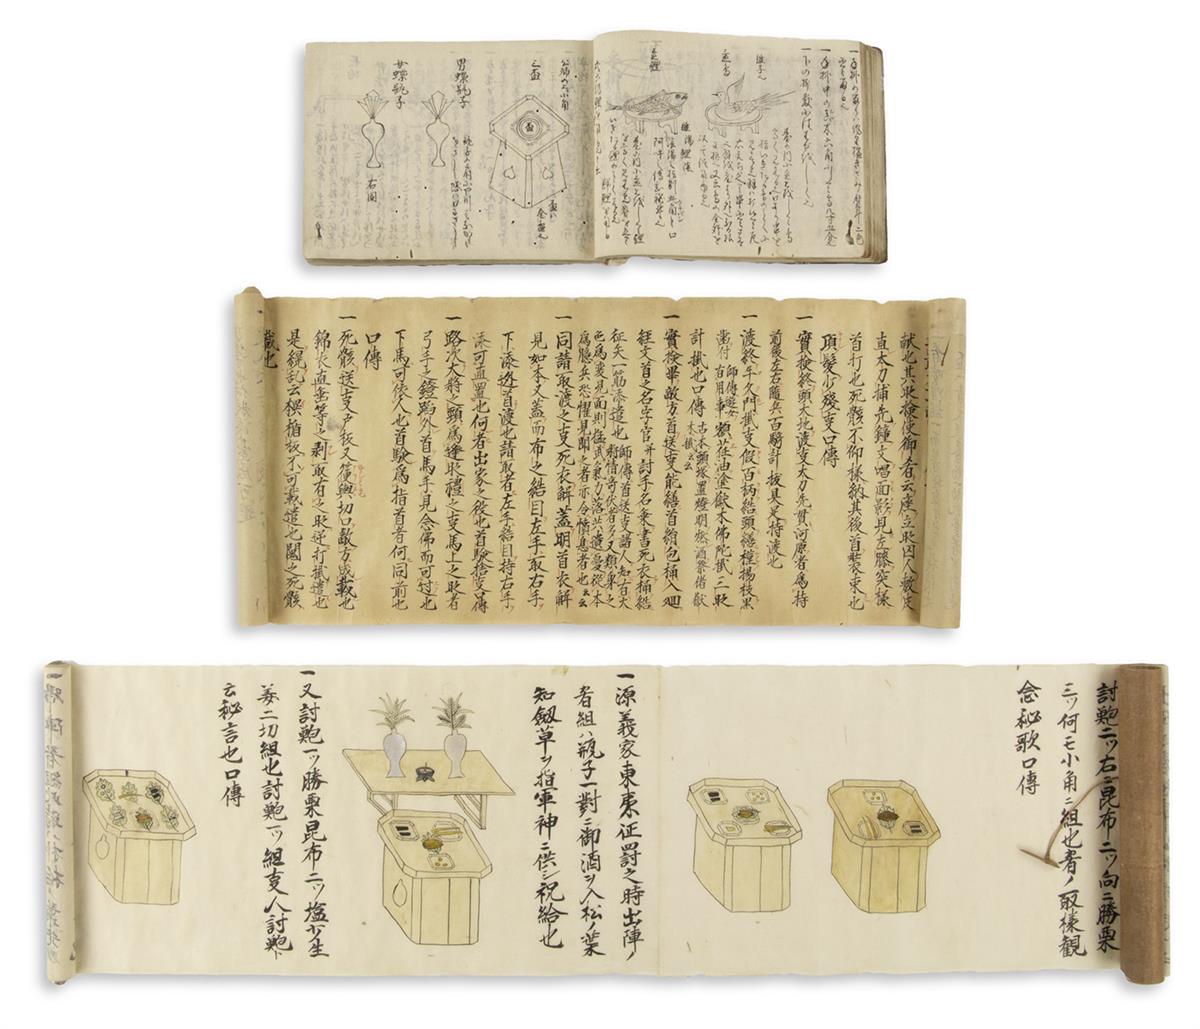 (JAPAN -- COOKERY.) Group of manuscript items relating to food preparation.